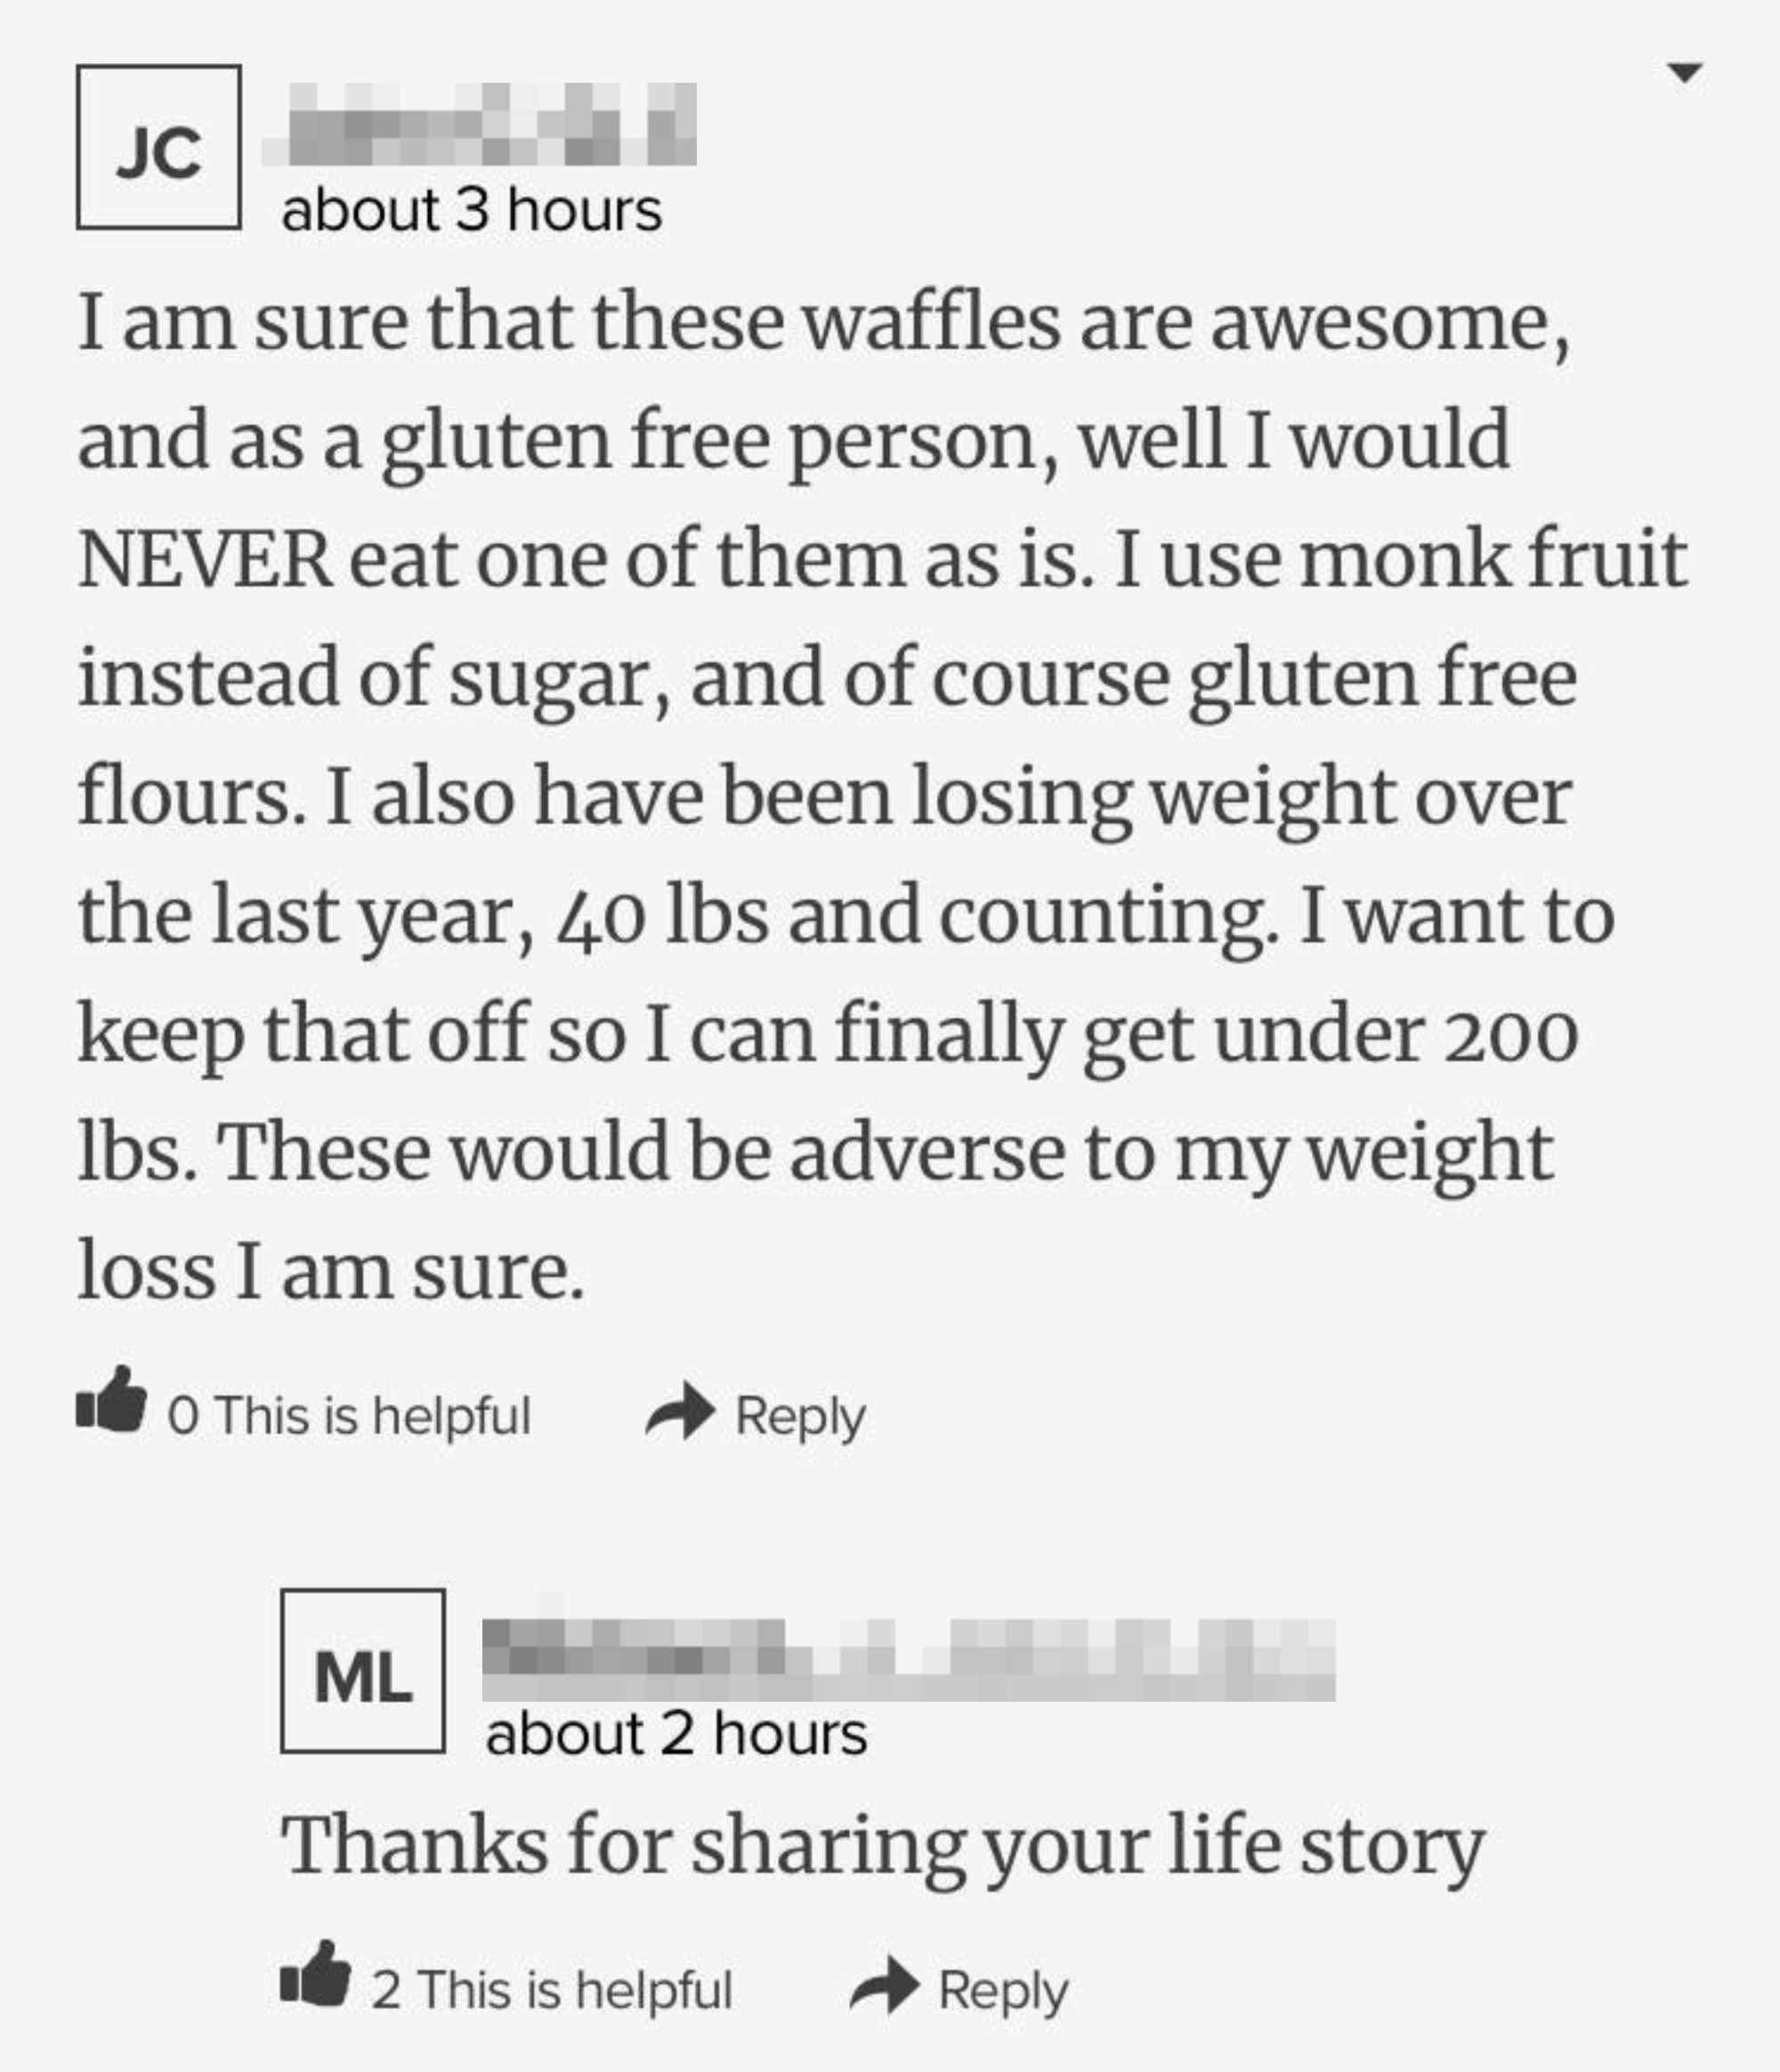 A wordy review of a waffle recipe where someone says they would never make the recipe since they are gluten-free and on a weight loss journey